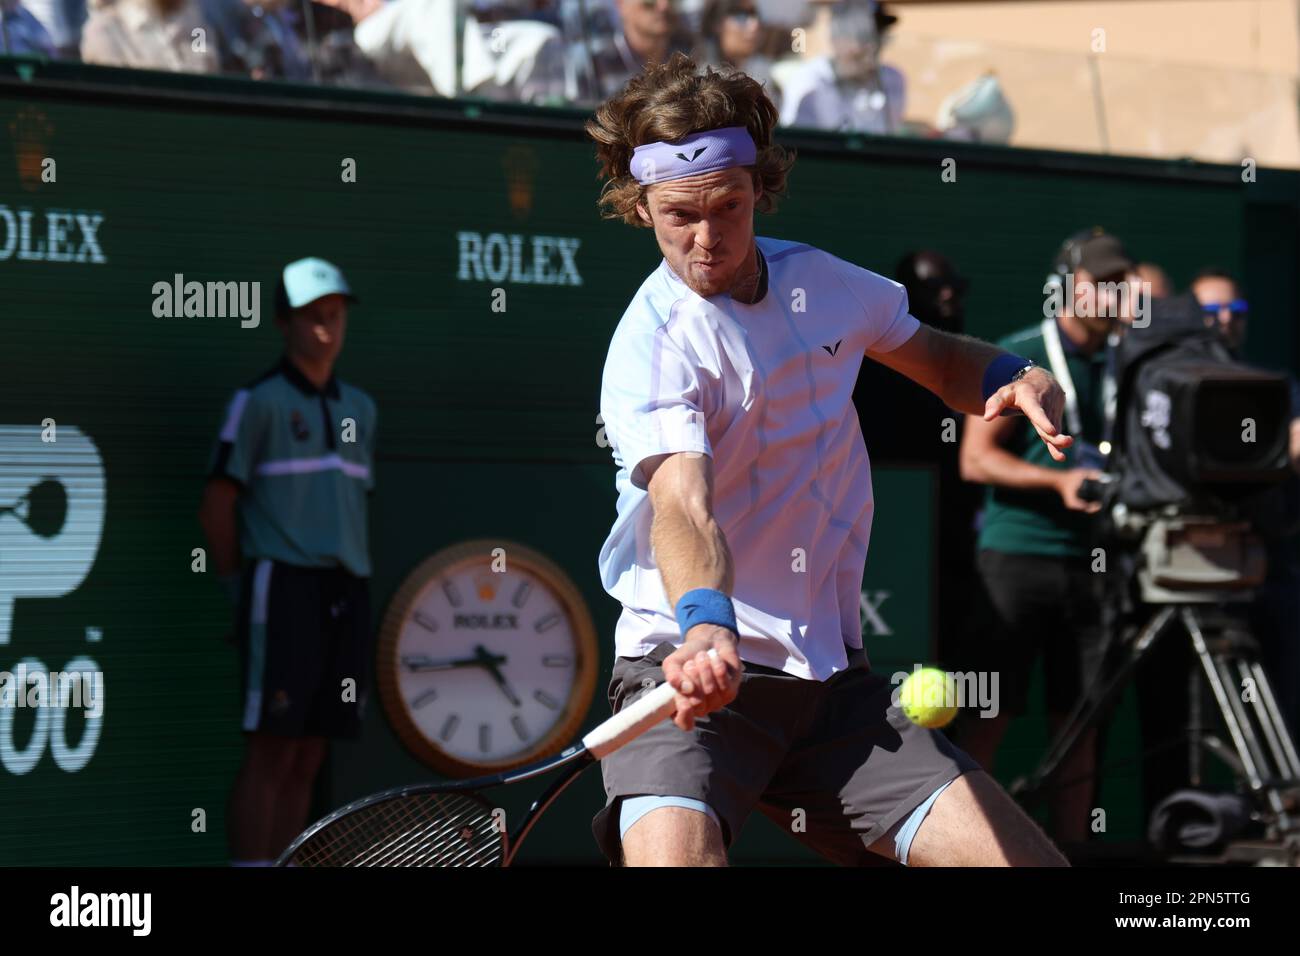 Monaco, Monaco. 17th Apr, 2023. MONACO, Monte Carlo, 16. April 2023; Holger Rune vs Andrey Rublev, Final Open Rolex Master 1000 Monte Carlo tennis tournament in the Monte Carlo Tennis Club on 16 April 2023, Andrey RUBLEV became match winner in this final - picture and copyright Thierry CARPICO/ATP images (CARPICO Thierry/ATP/SPP) Credit: SPP Sport Press Photo. /Alamy Live News Stock Photo